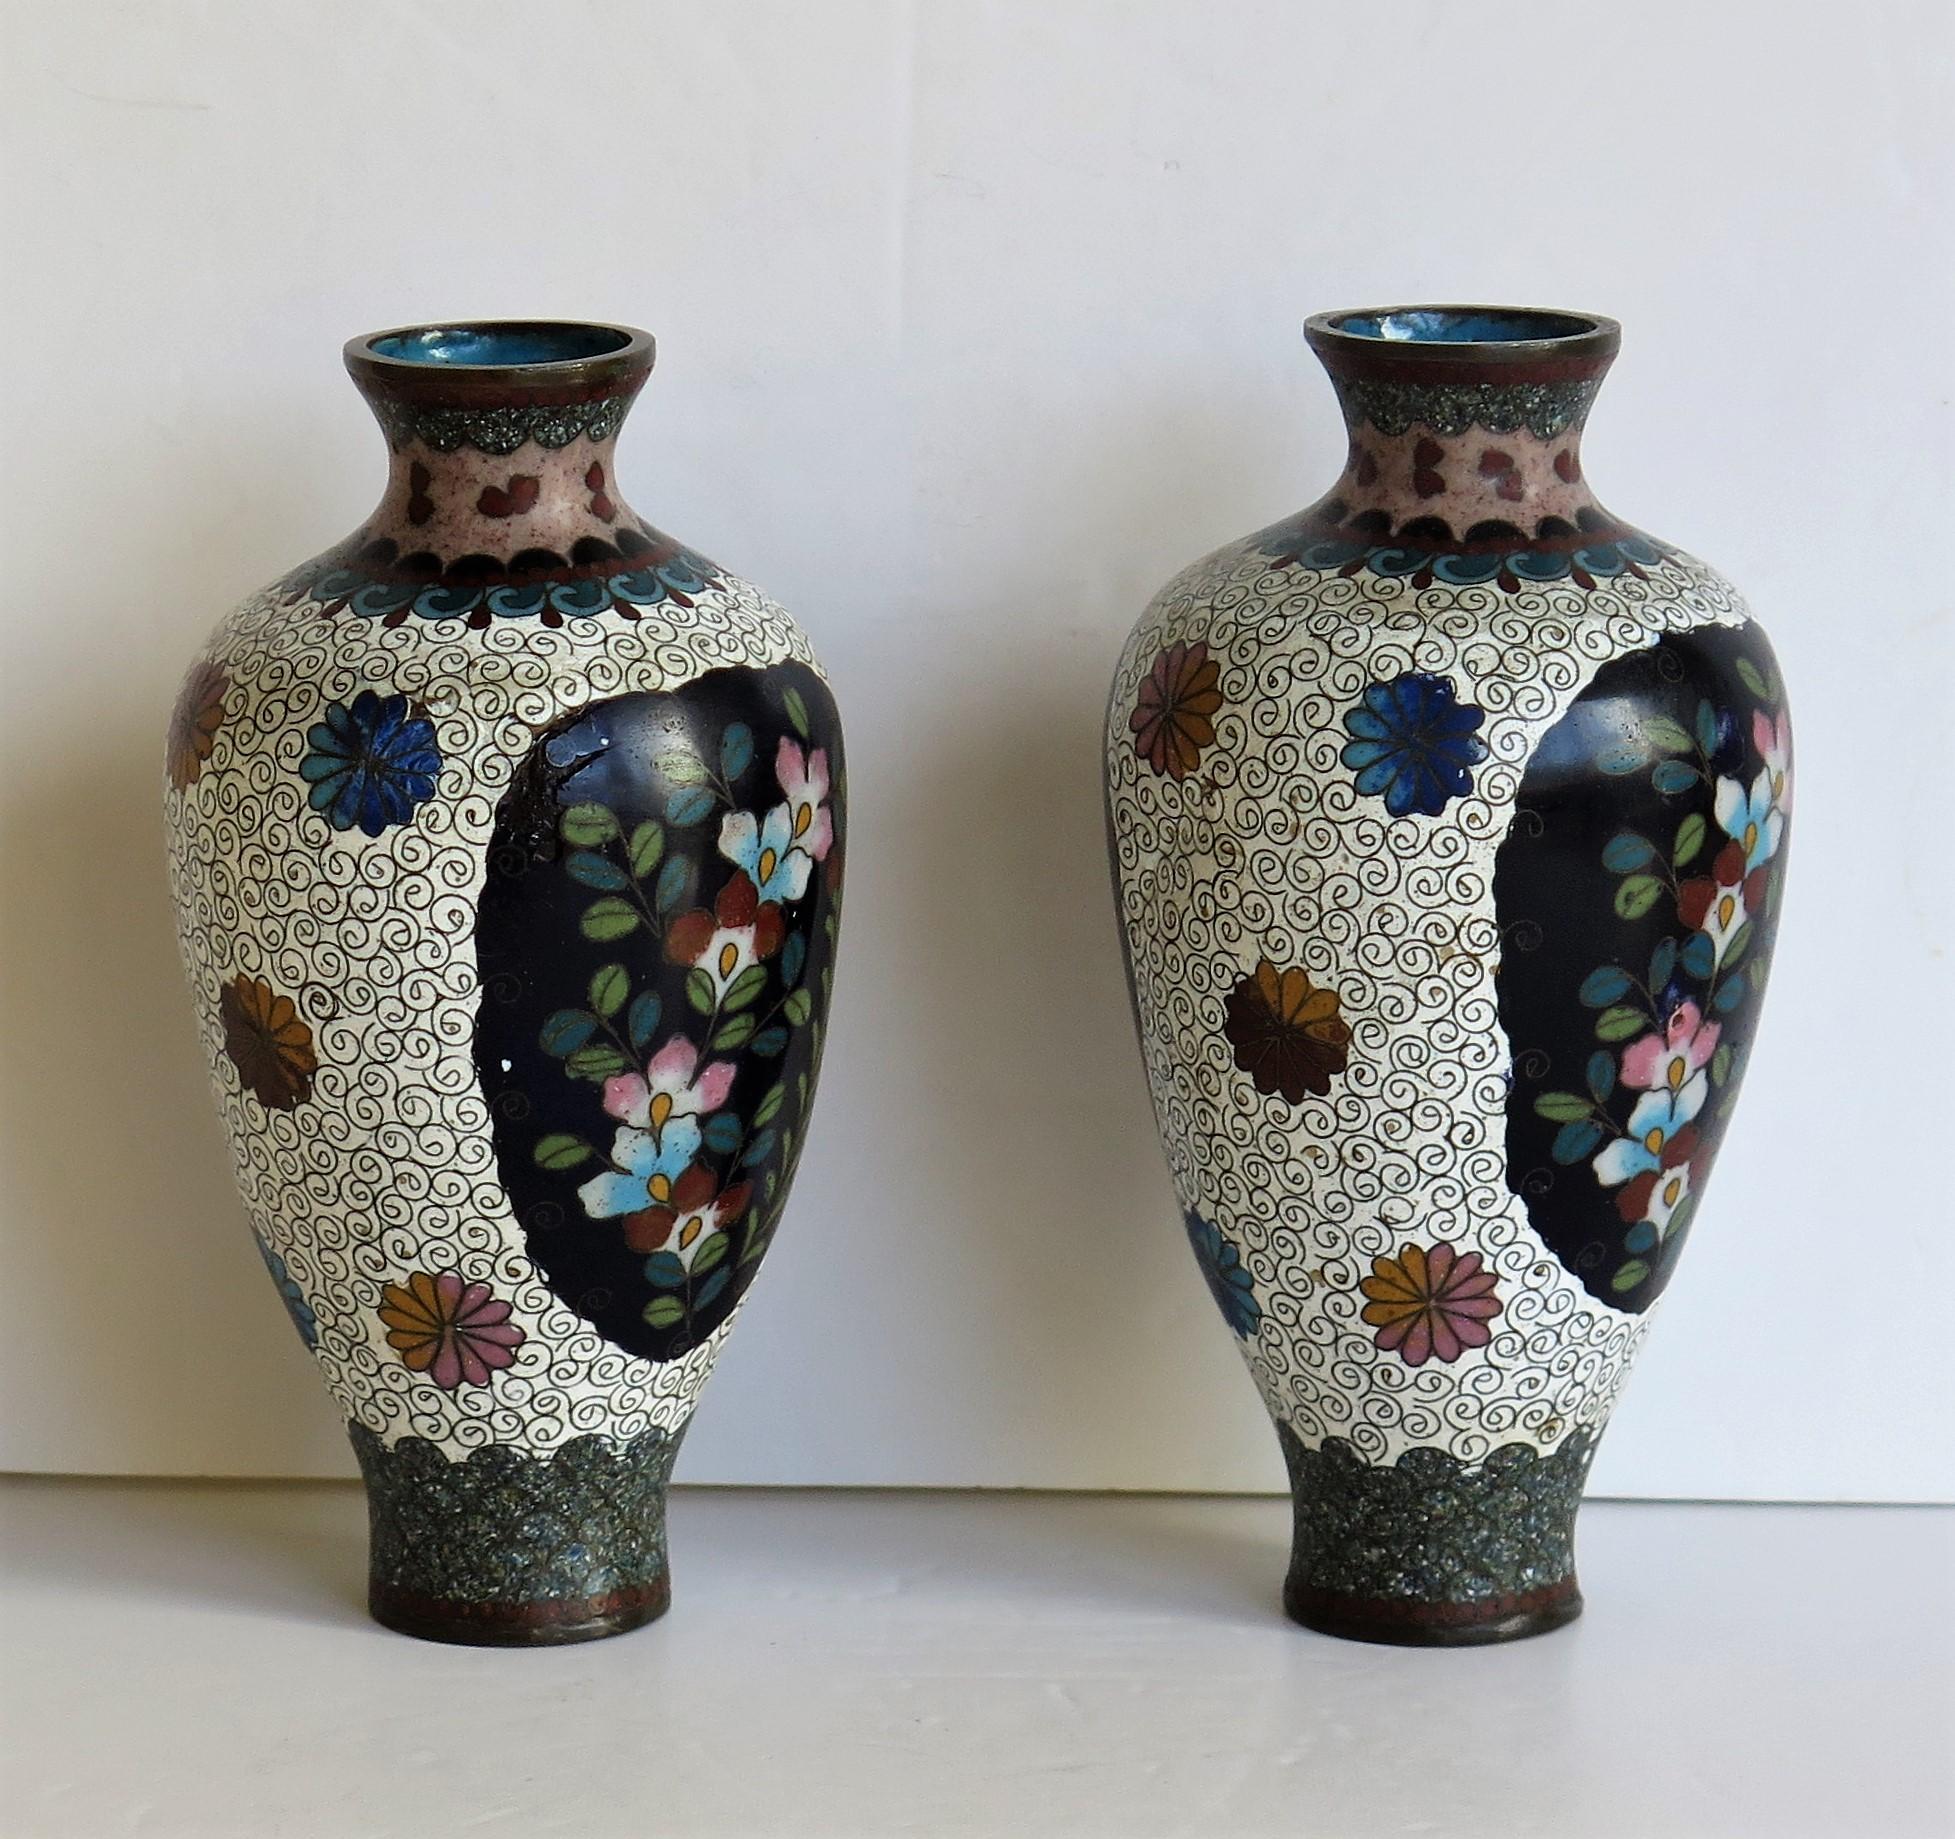 Japanese Cloisonné Vases Butterflies & Flowers, 19th Century Meiji Period, Pair In Good Condition For Sale In Lincoln, Lincolnshire